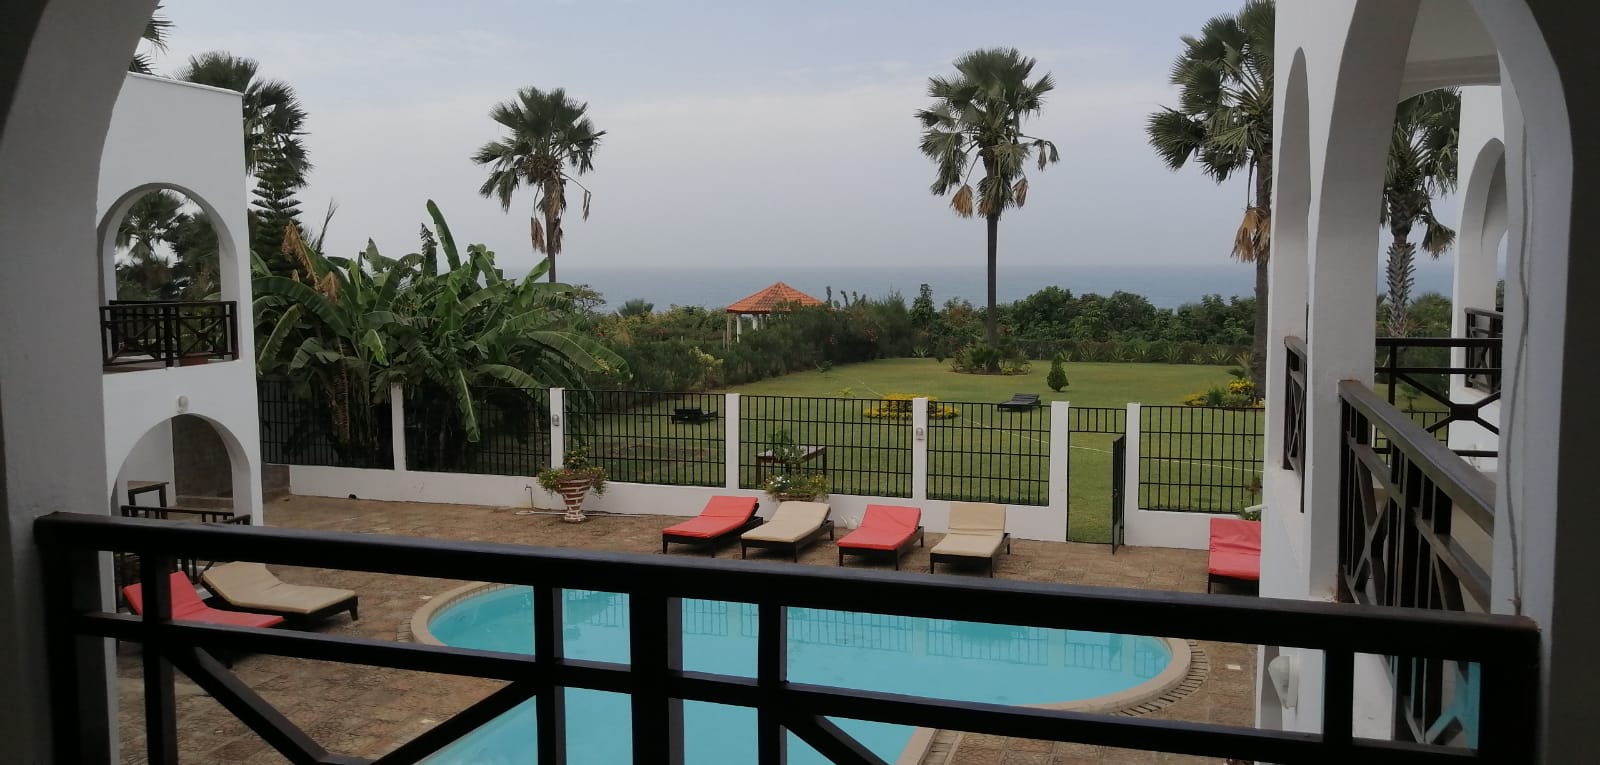 Harmony1etagepoolmeer - CHRISTMAS IN GAMBIA? HARMONY RESORT OFFERS A GREAT GARDEN &amp; POOL AND AN ABSOLUTE PRIME LOCATION WITH SEA VIEW